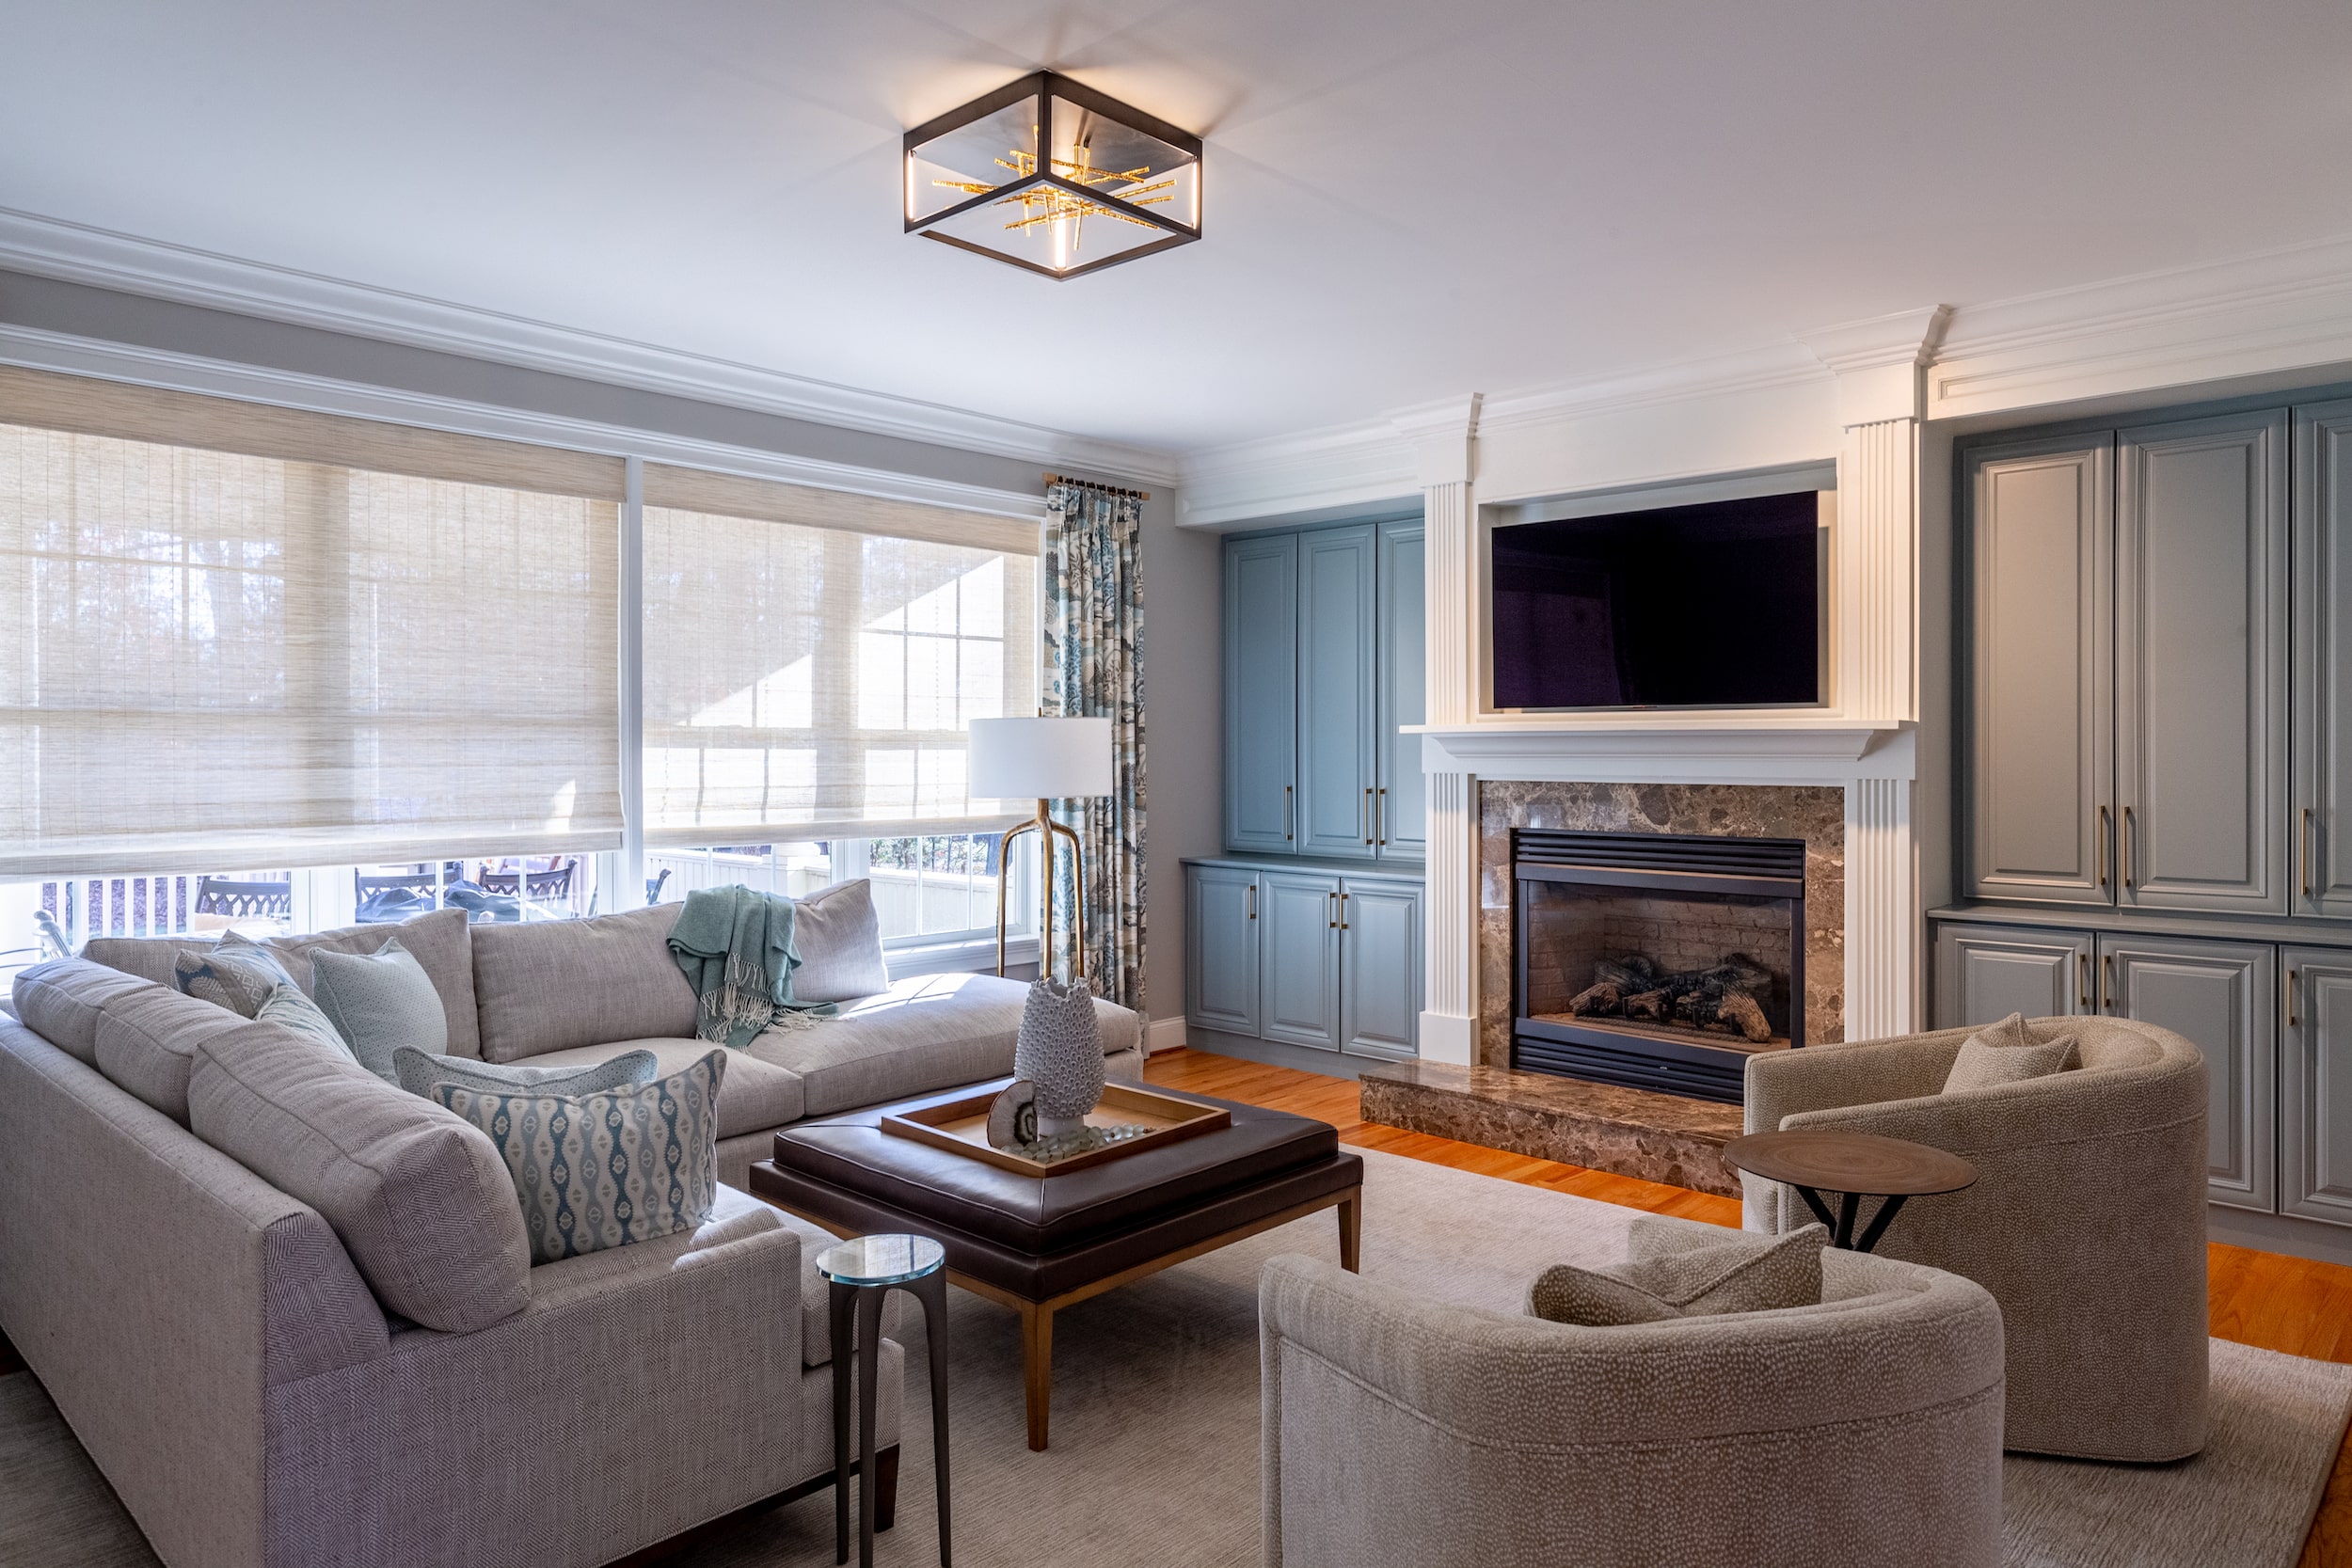 A beautifully comfortable family room created with interior design expertise